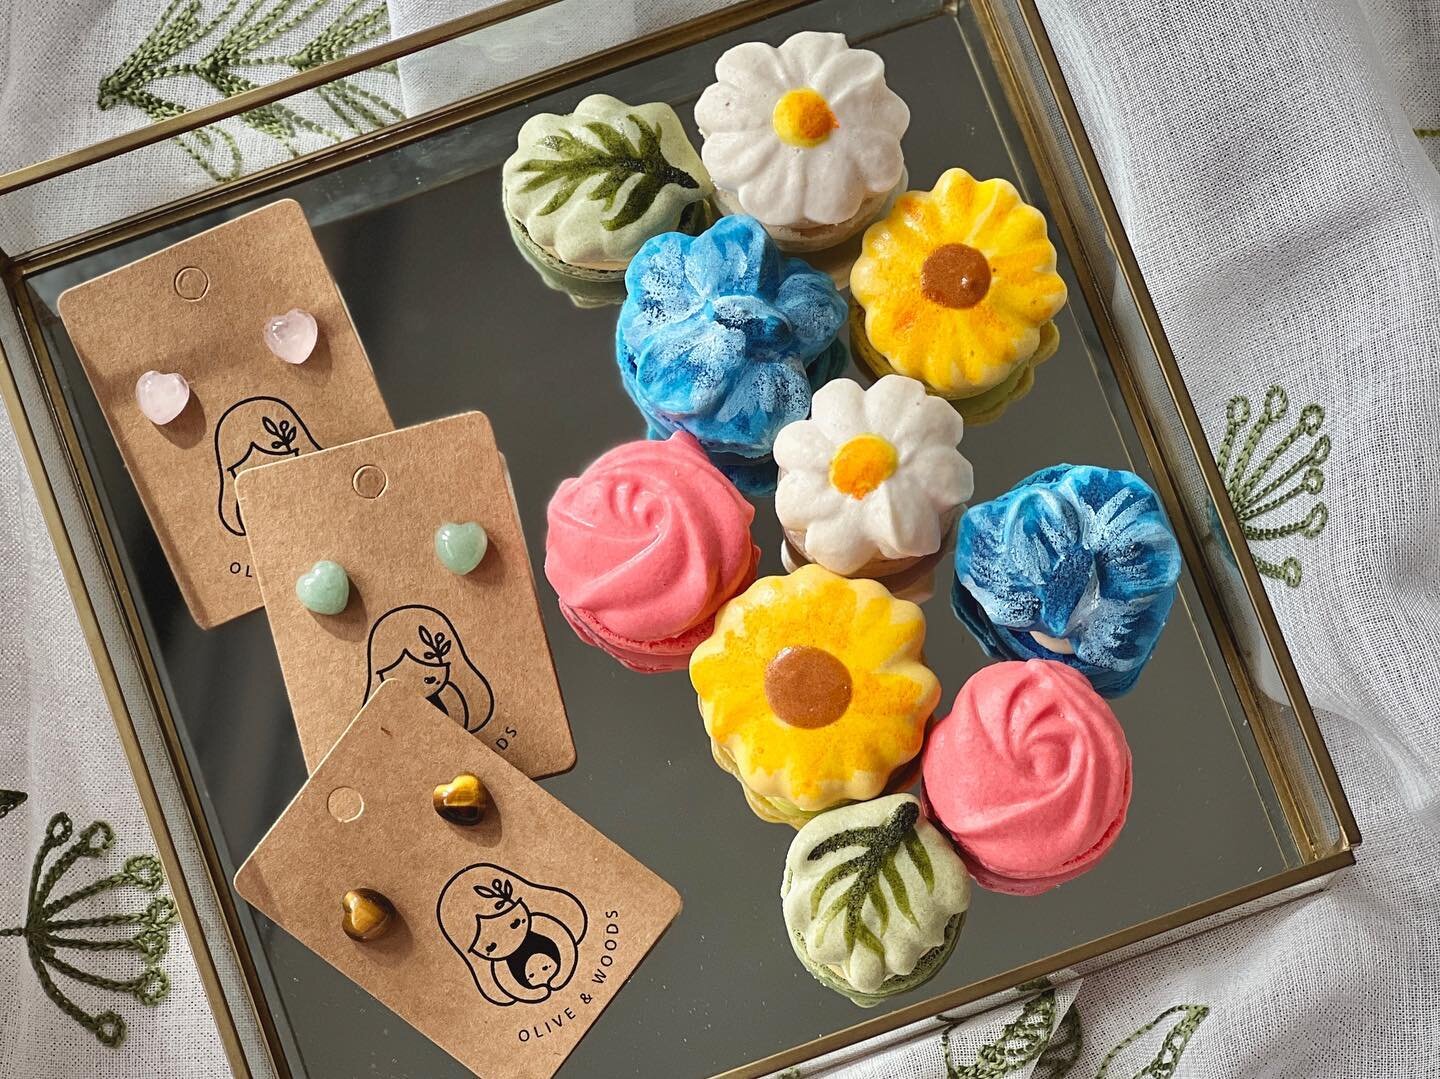 OLIVE &amp; WOODS x PASTORIES 

Celebrate mother's day this year with a special bundle of gemstone earrings by @oliveandwoods and an edible macaron bouquet by @pastoriessg ! 

💐 Mother's day bundle 🎁 
Bundle A - $45:
&bull; 10 pc Macarons (Pistachi